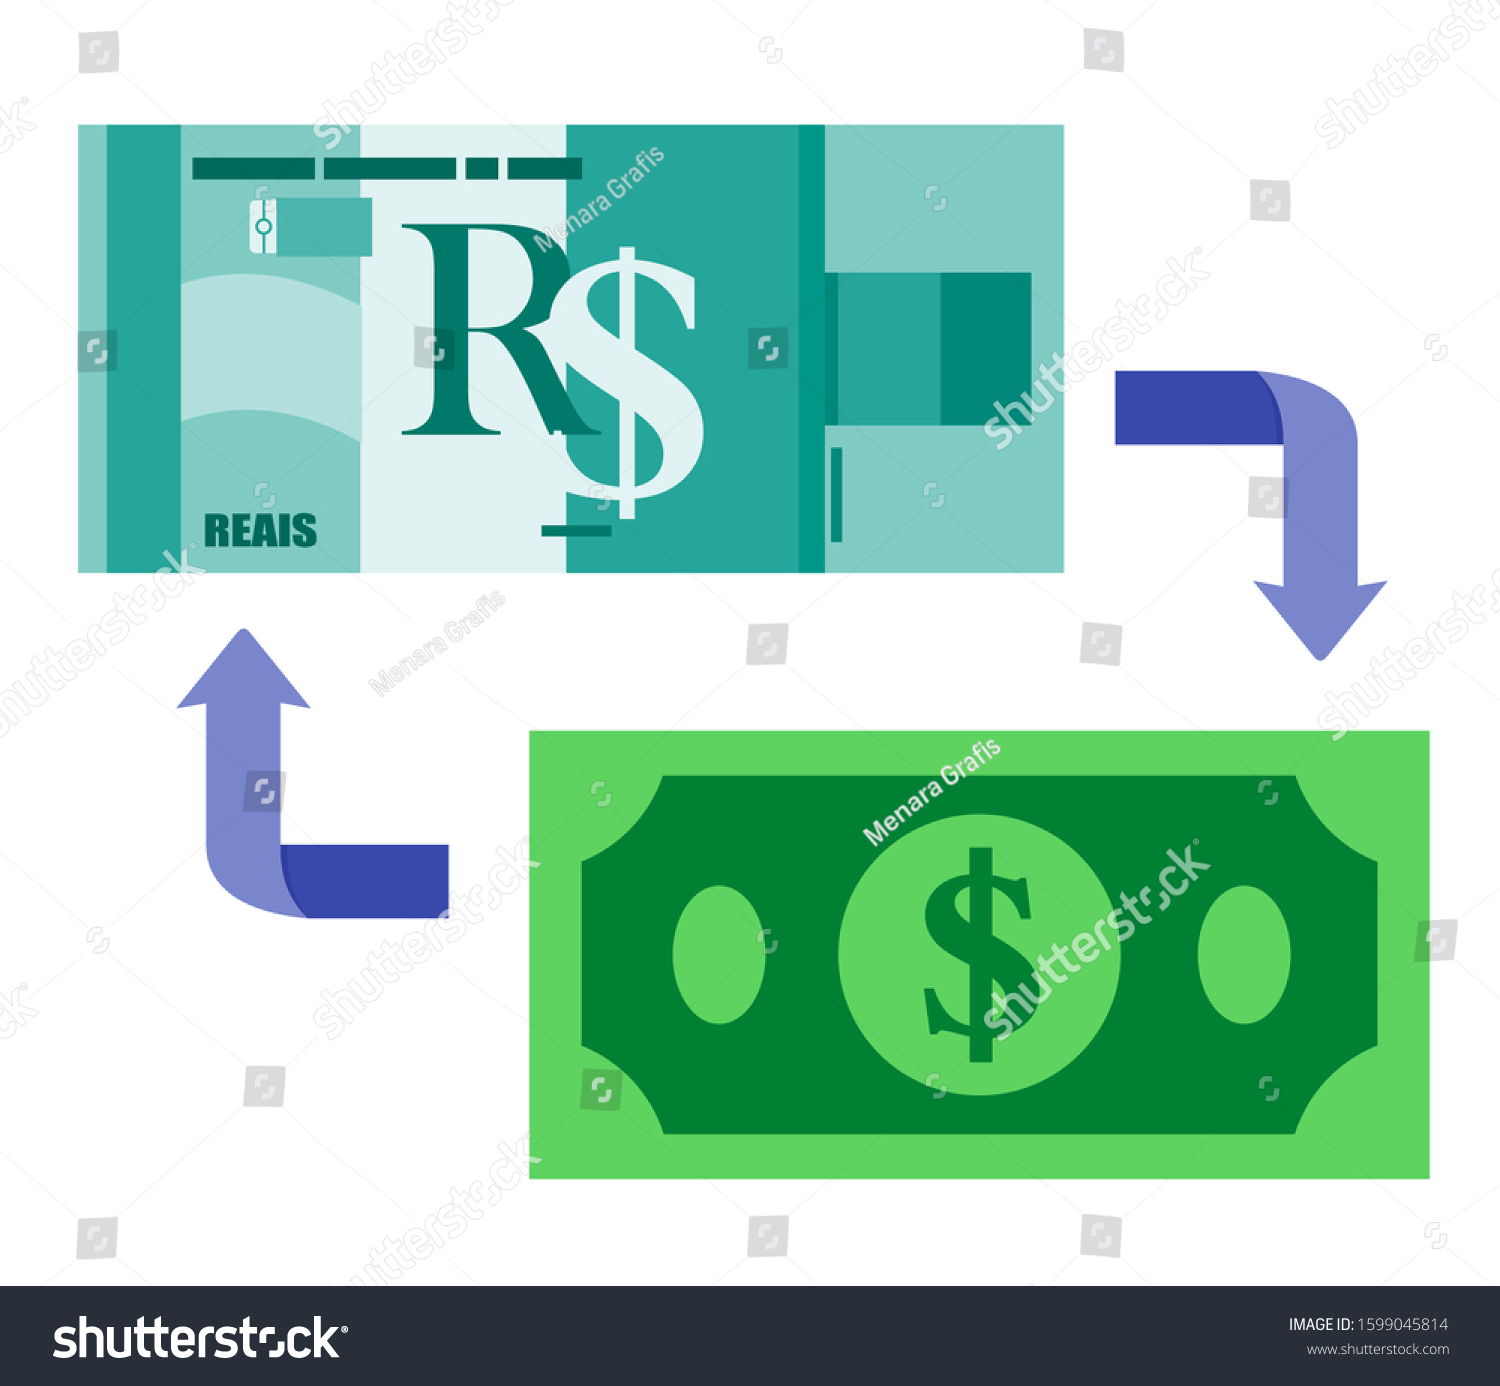 SVG of Brazilian Real BRL Exchange to US Dollar USD vector icon logo illustration design. Brazil currency, economy, finance, and business element. Can be used for web, mobile, infographic and print. svg